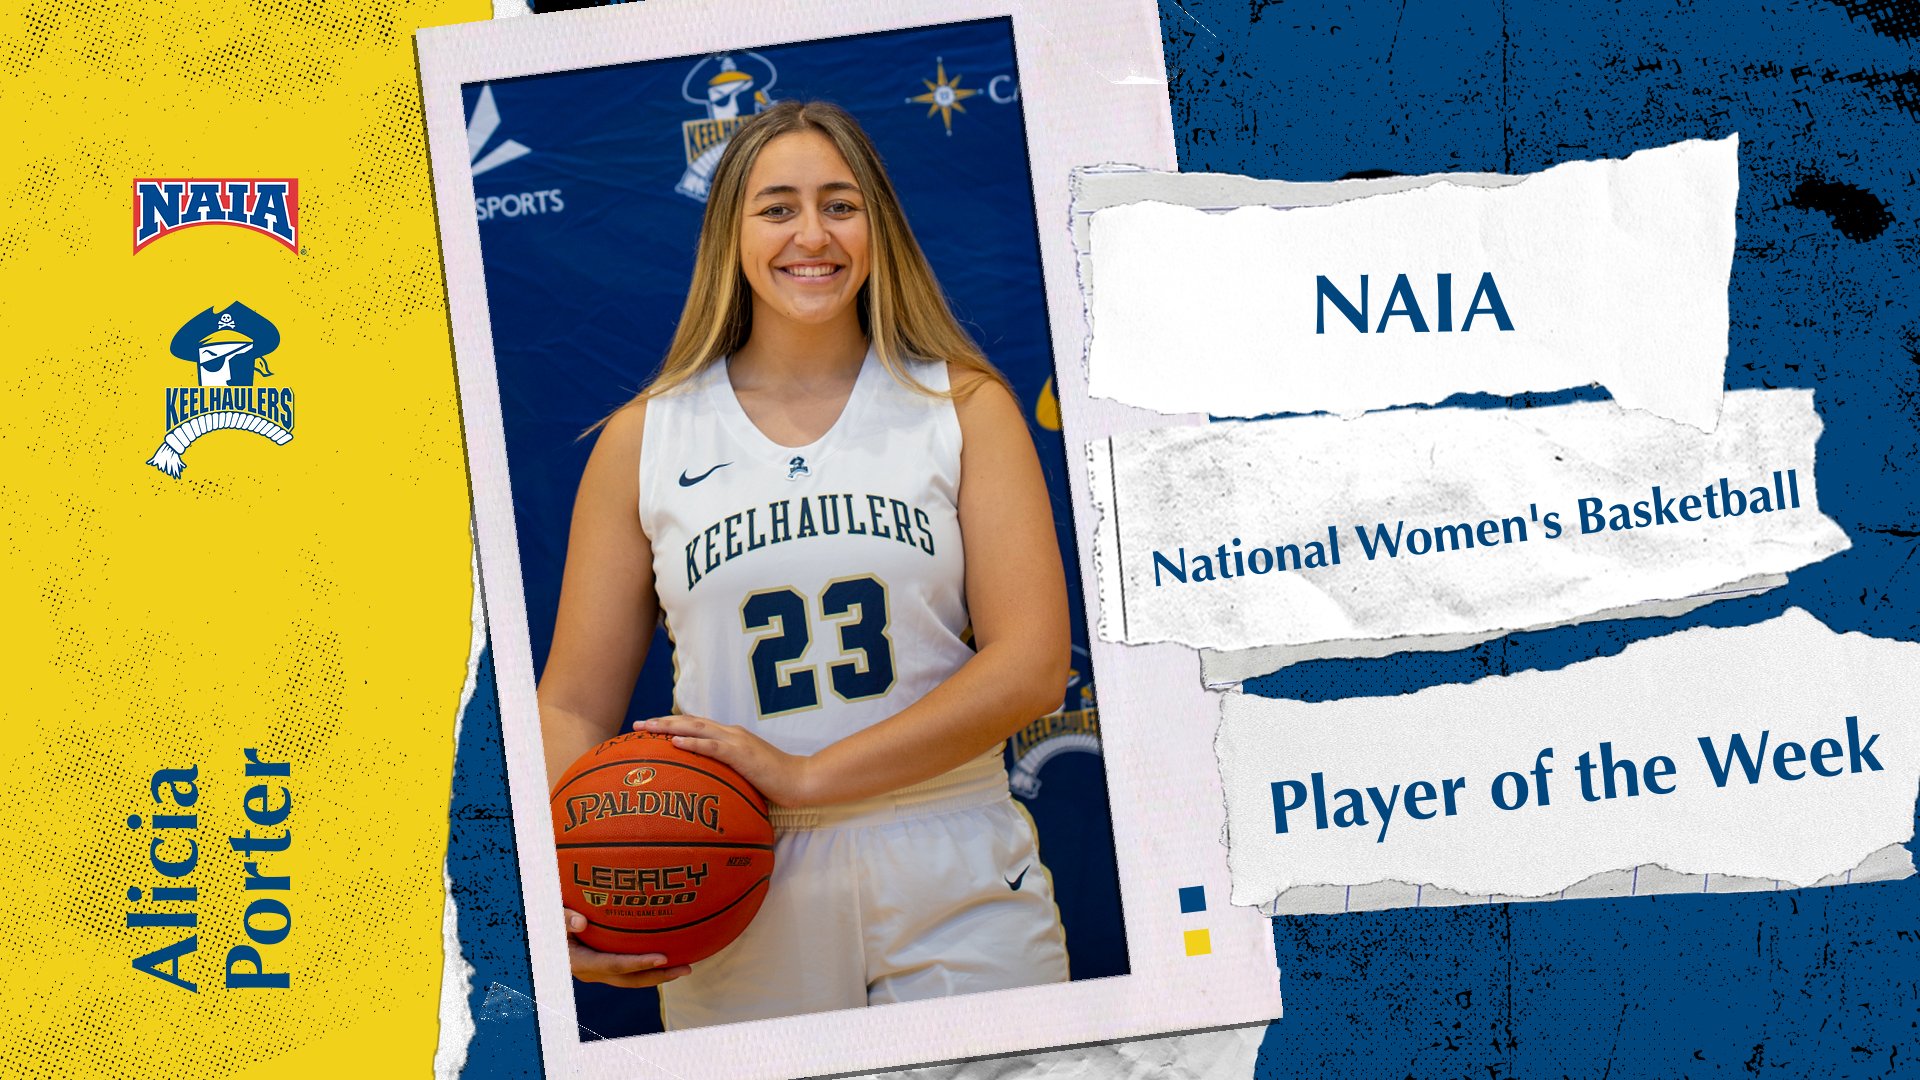 NAIA names Alicia Porter as its National Player of the Week